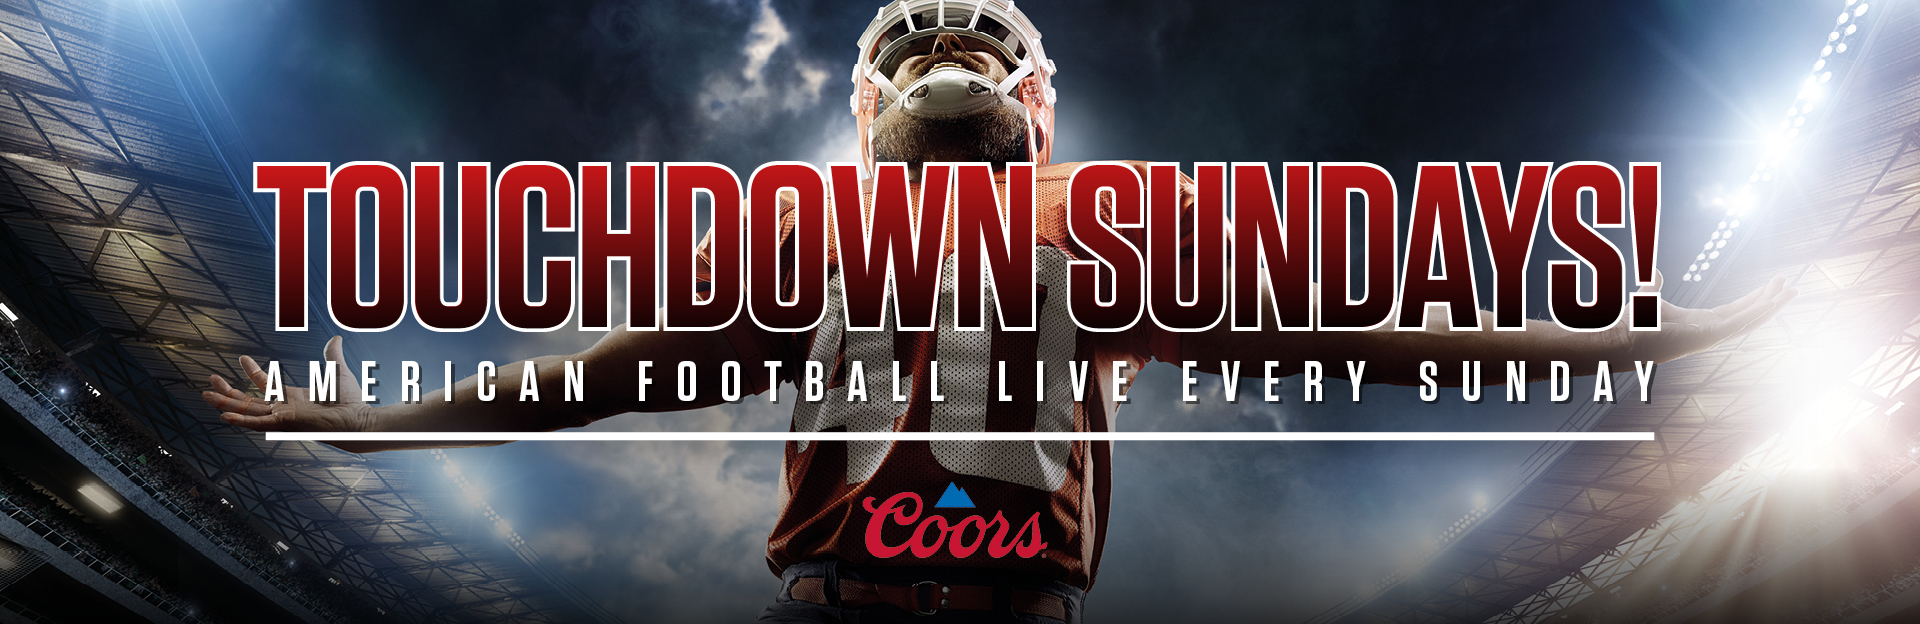 Watch NFL at The Windsor